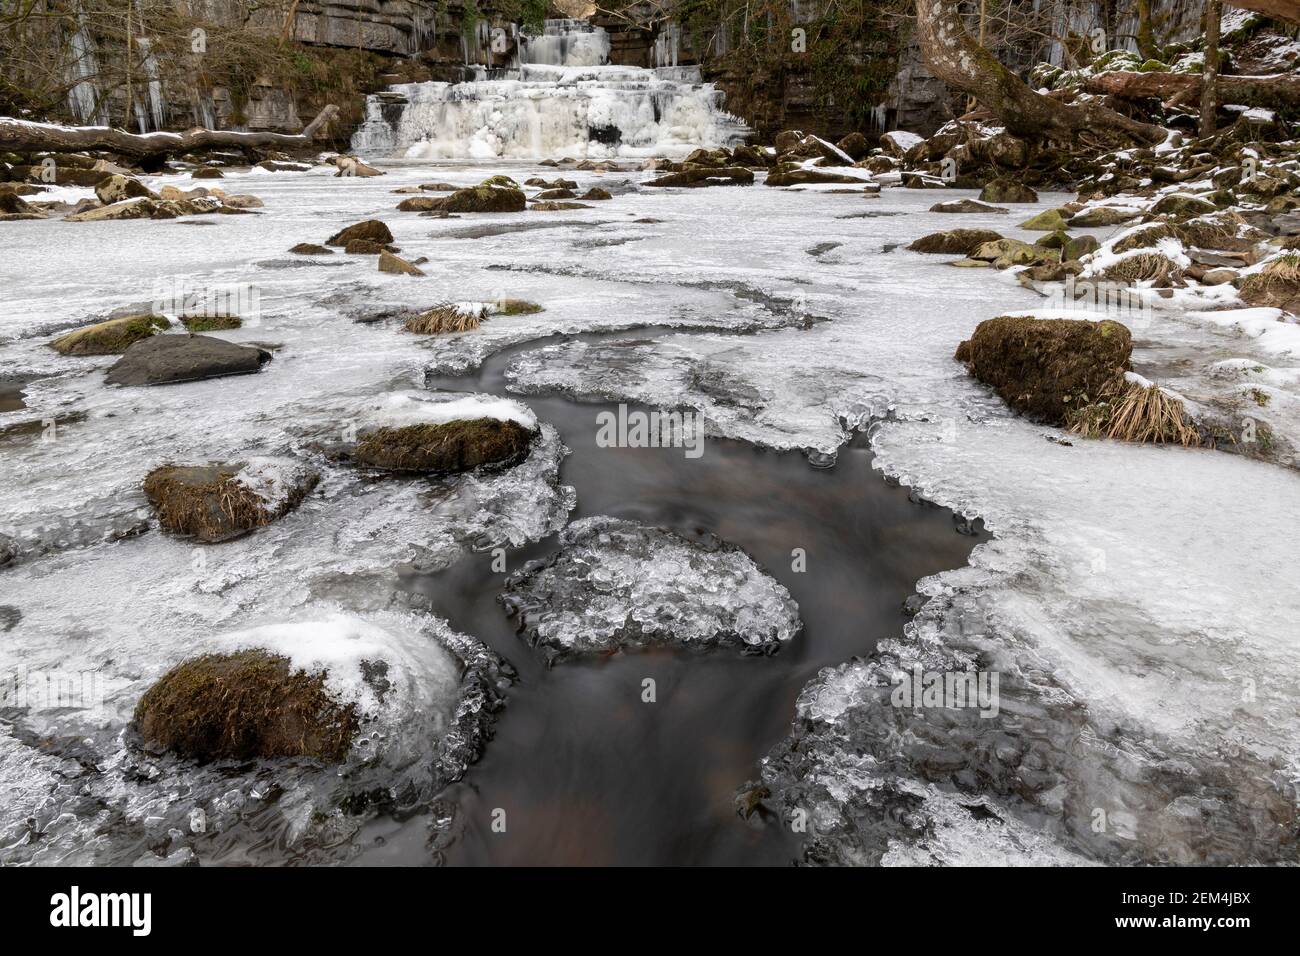 Cotter Force in the Yorkshire Dales National Park covered in ice during a cold spell. North Yorkshire, UK. Stock Photo